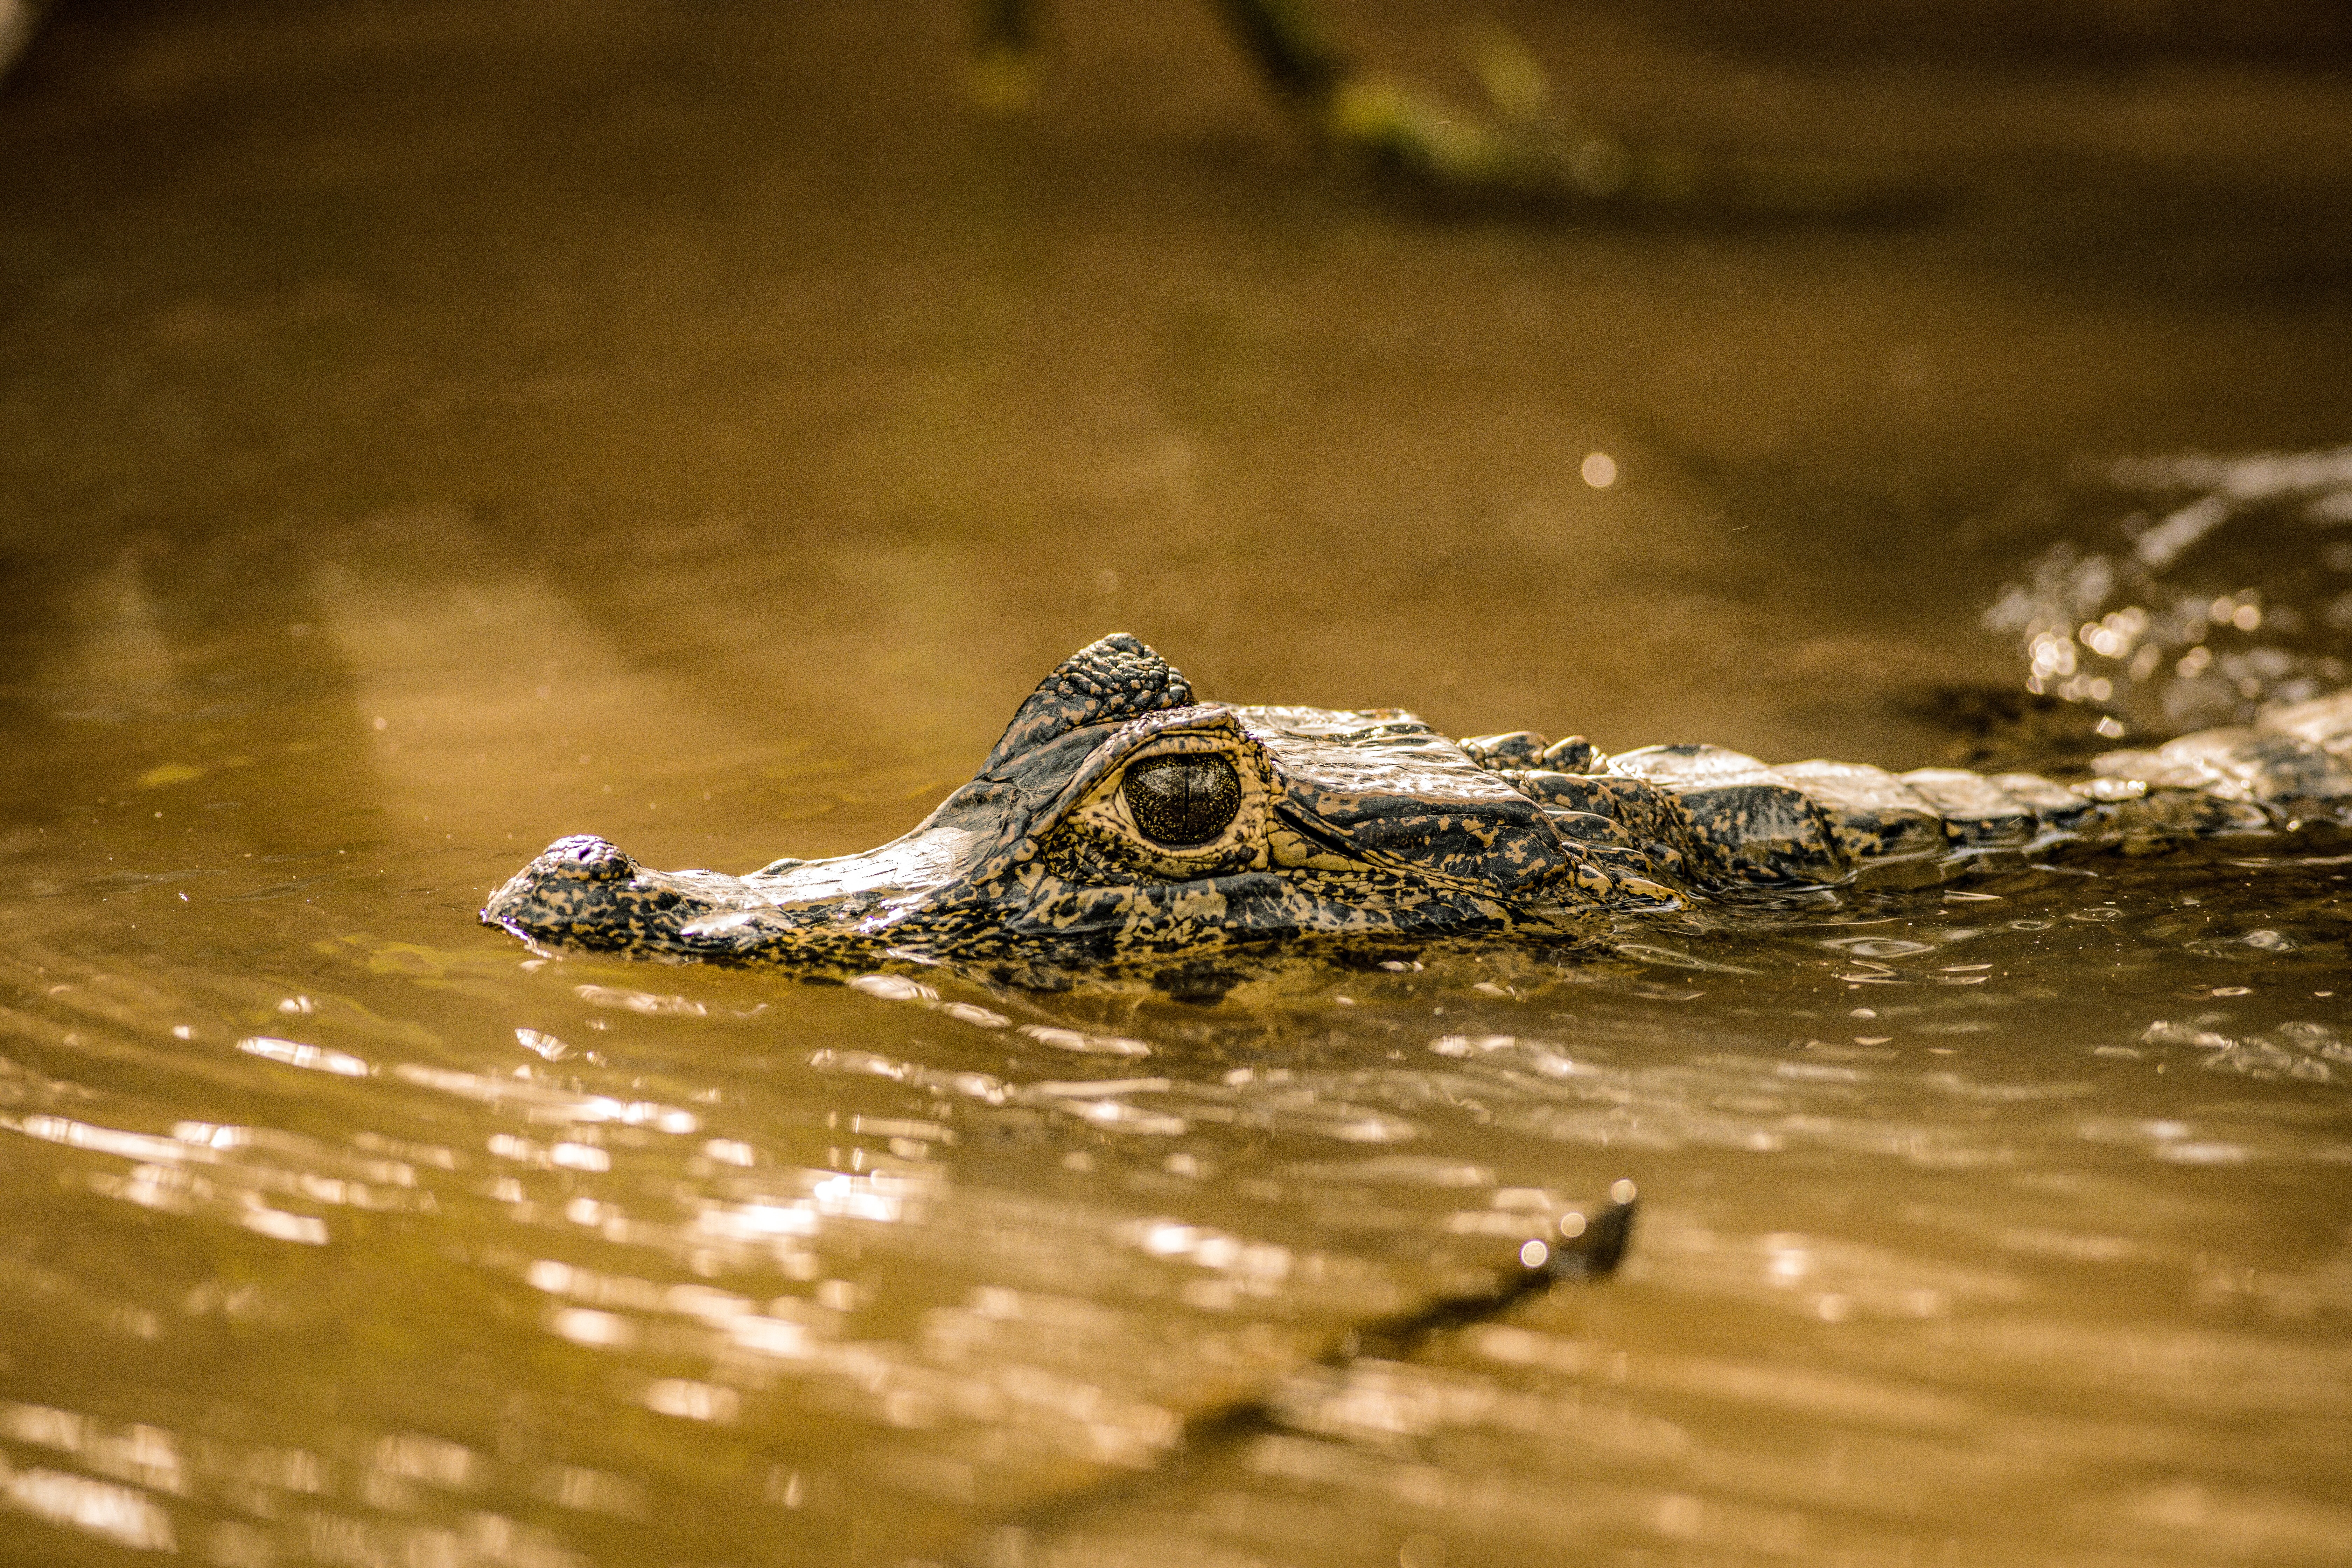 A wetland under siege: is the Pantanal a paradise lost?